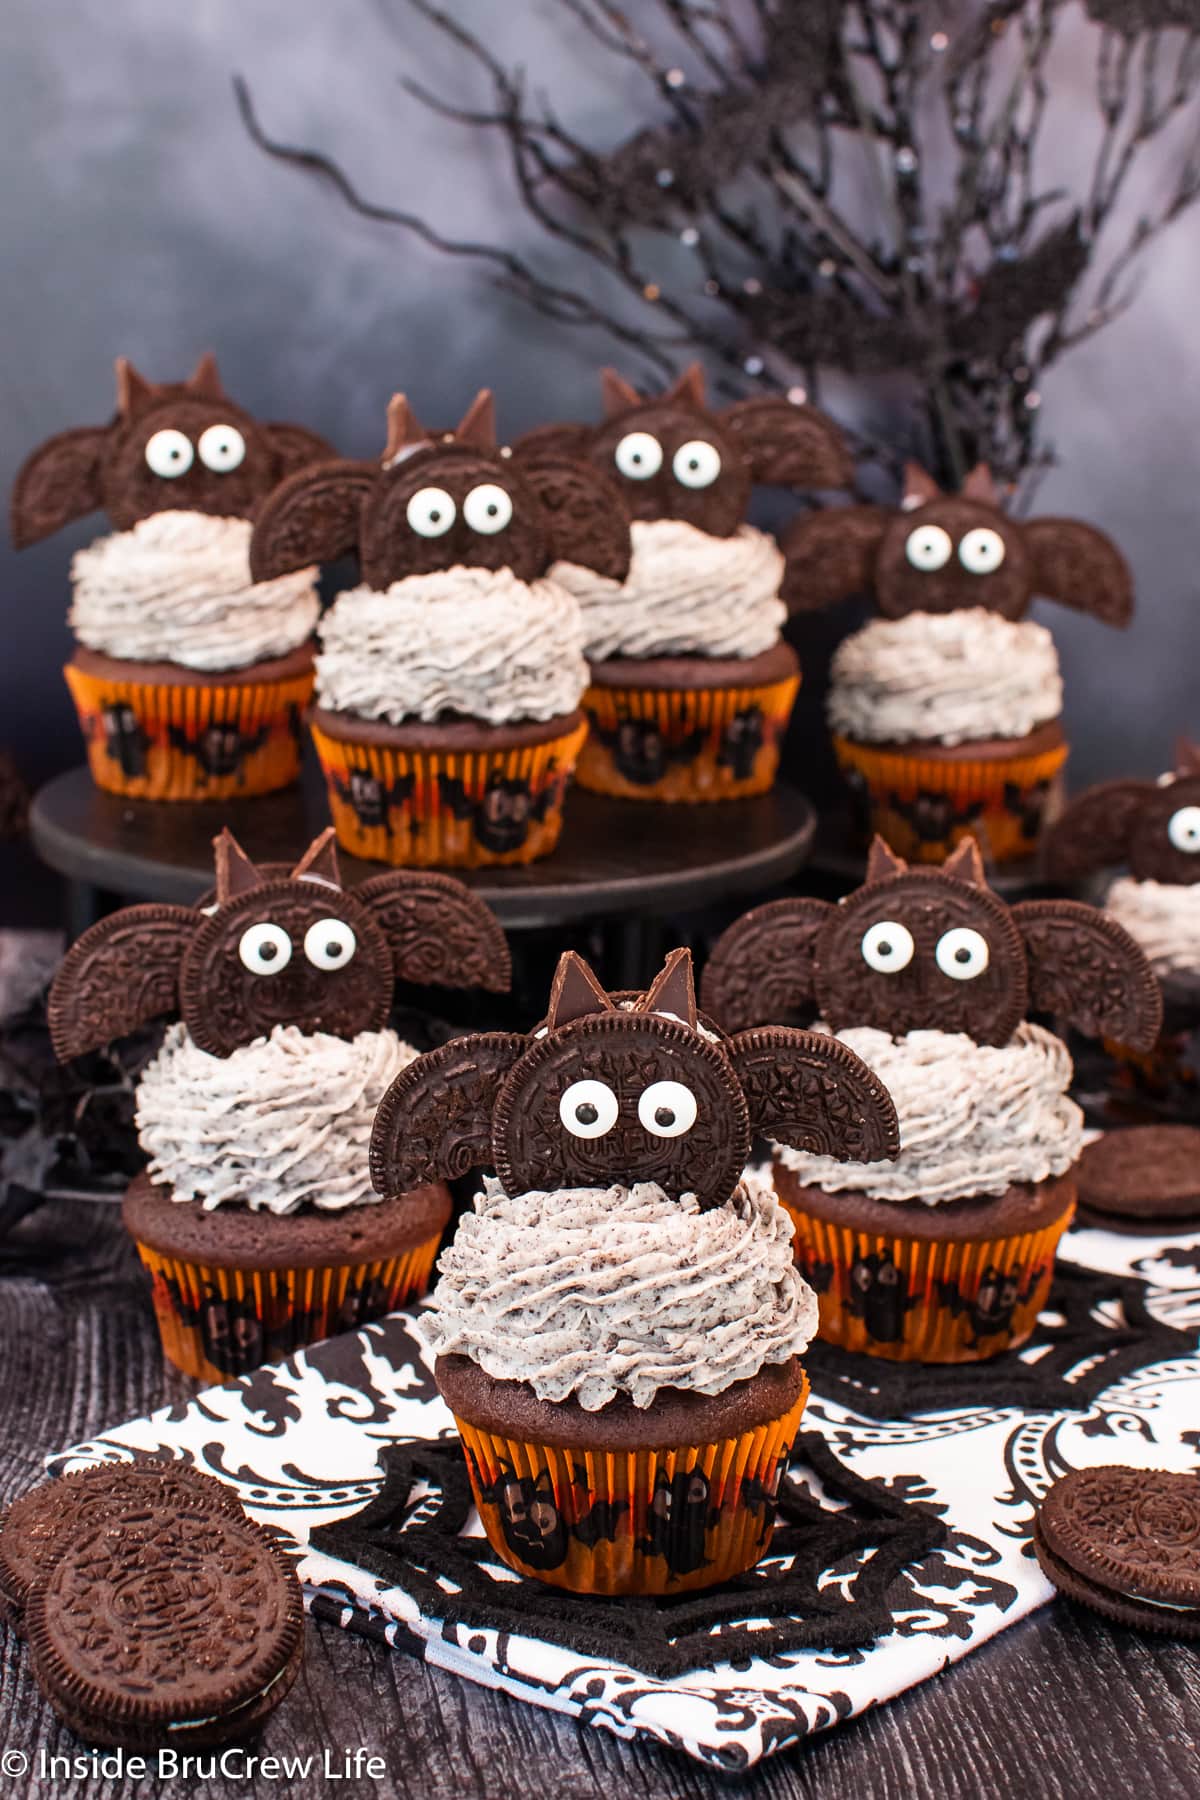 Cupcakes topped with Oreo cookies that look like bats.